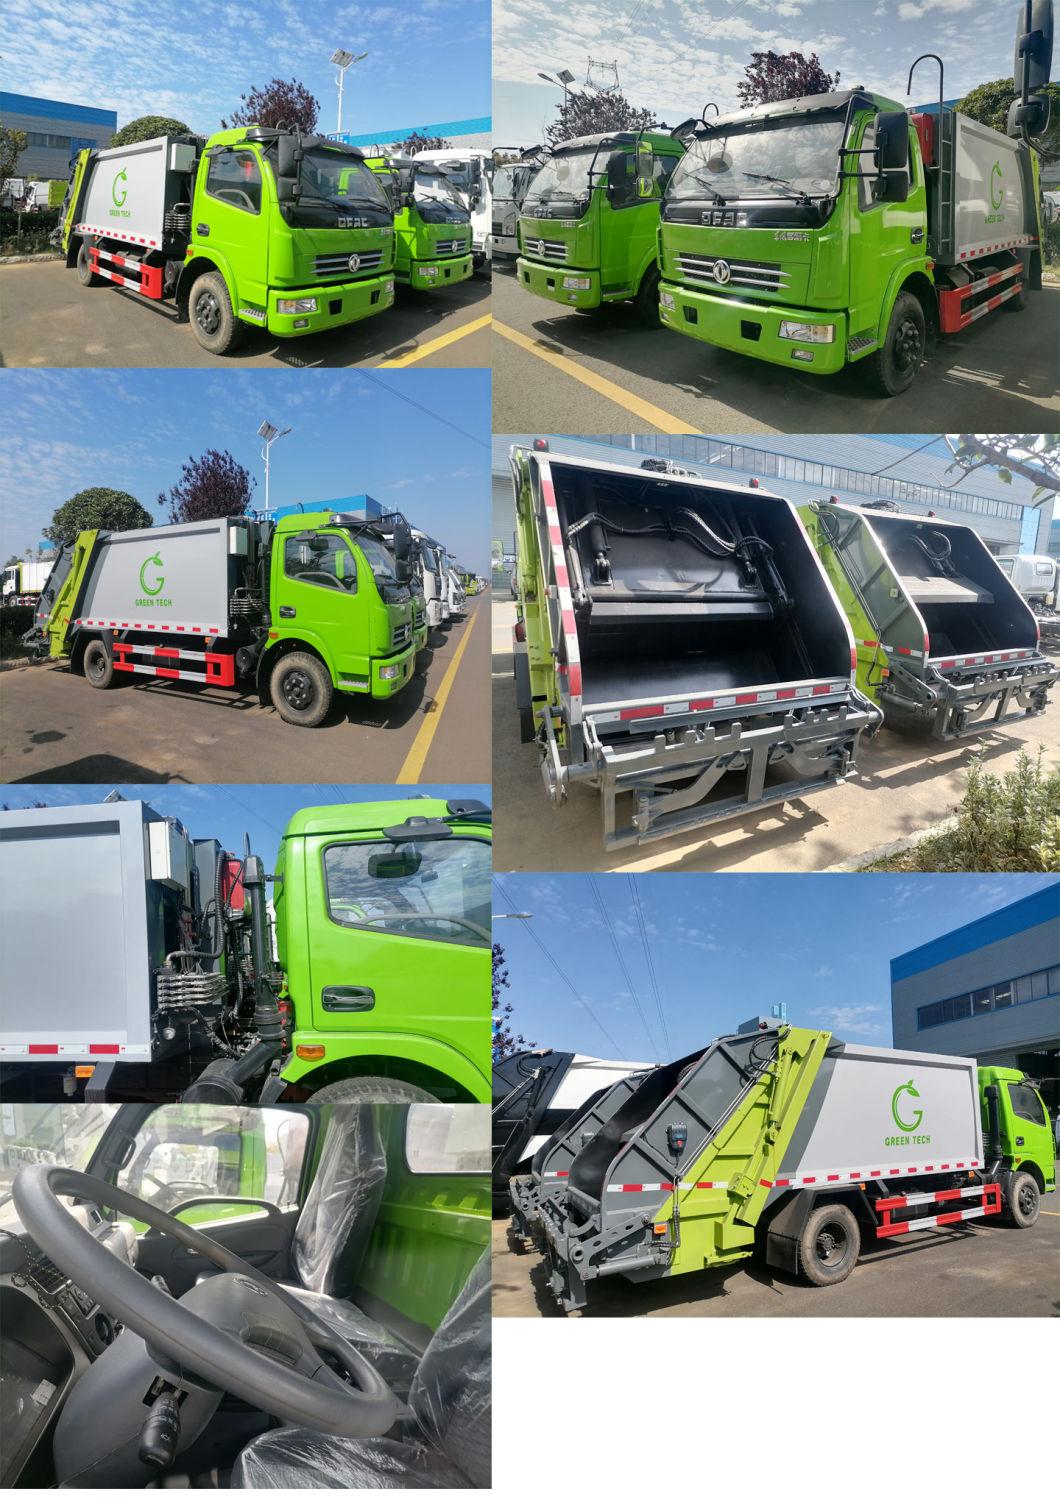 Dongfeng 6m3 Compression Garbage Truck